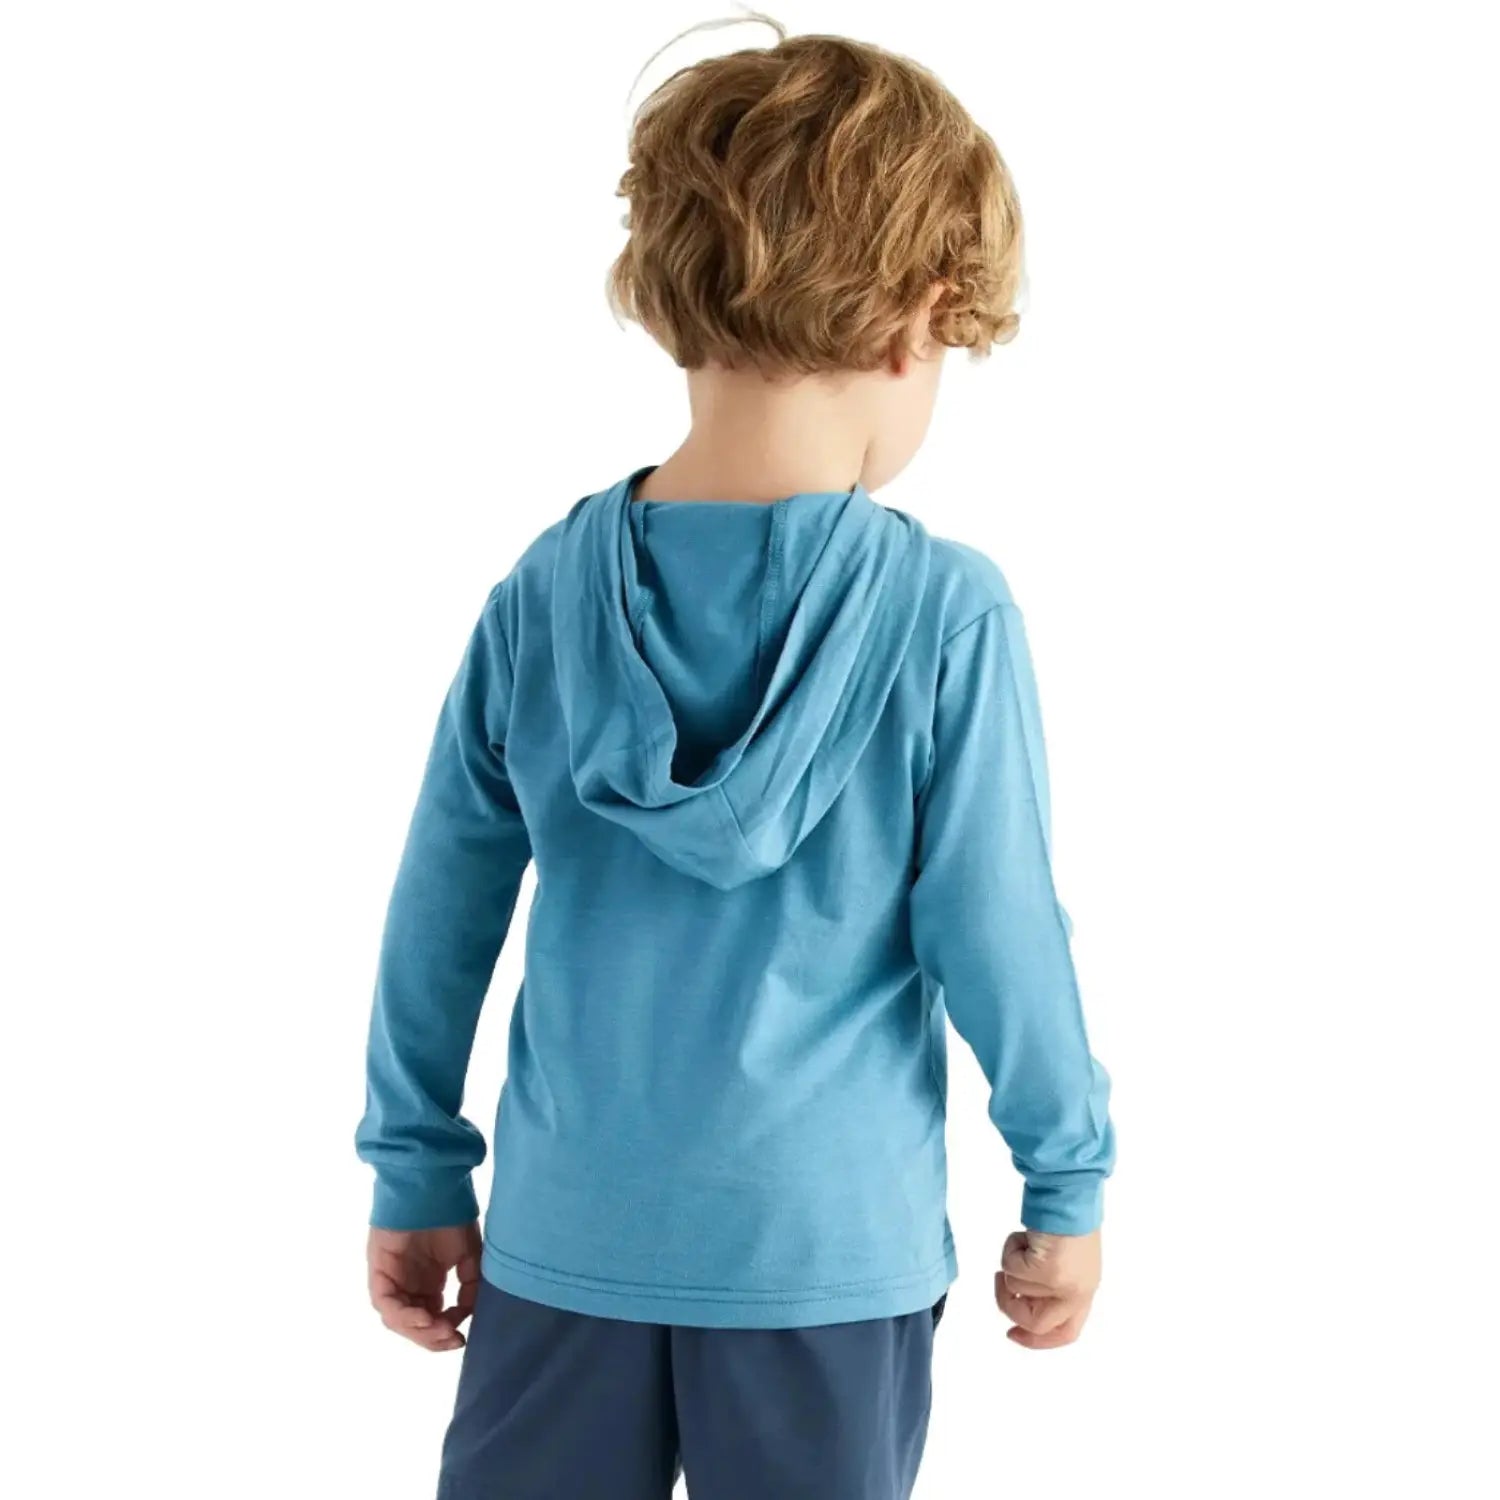 Free Fly Toddler Bamboo Shade Hoodie, Bluestone, back view on model 